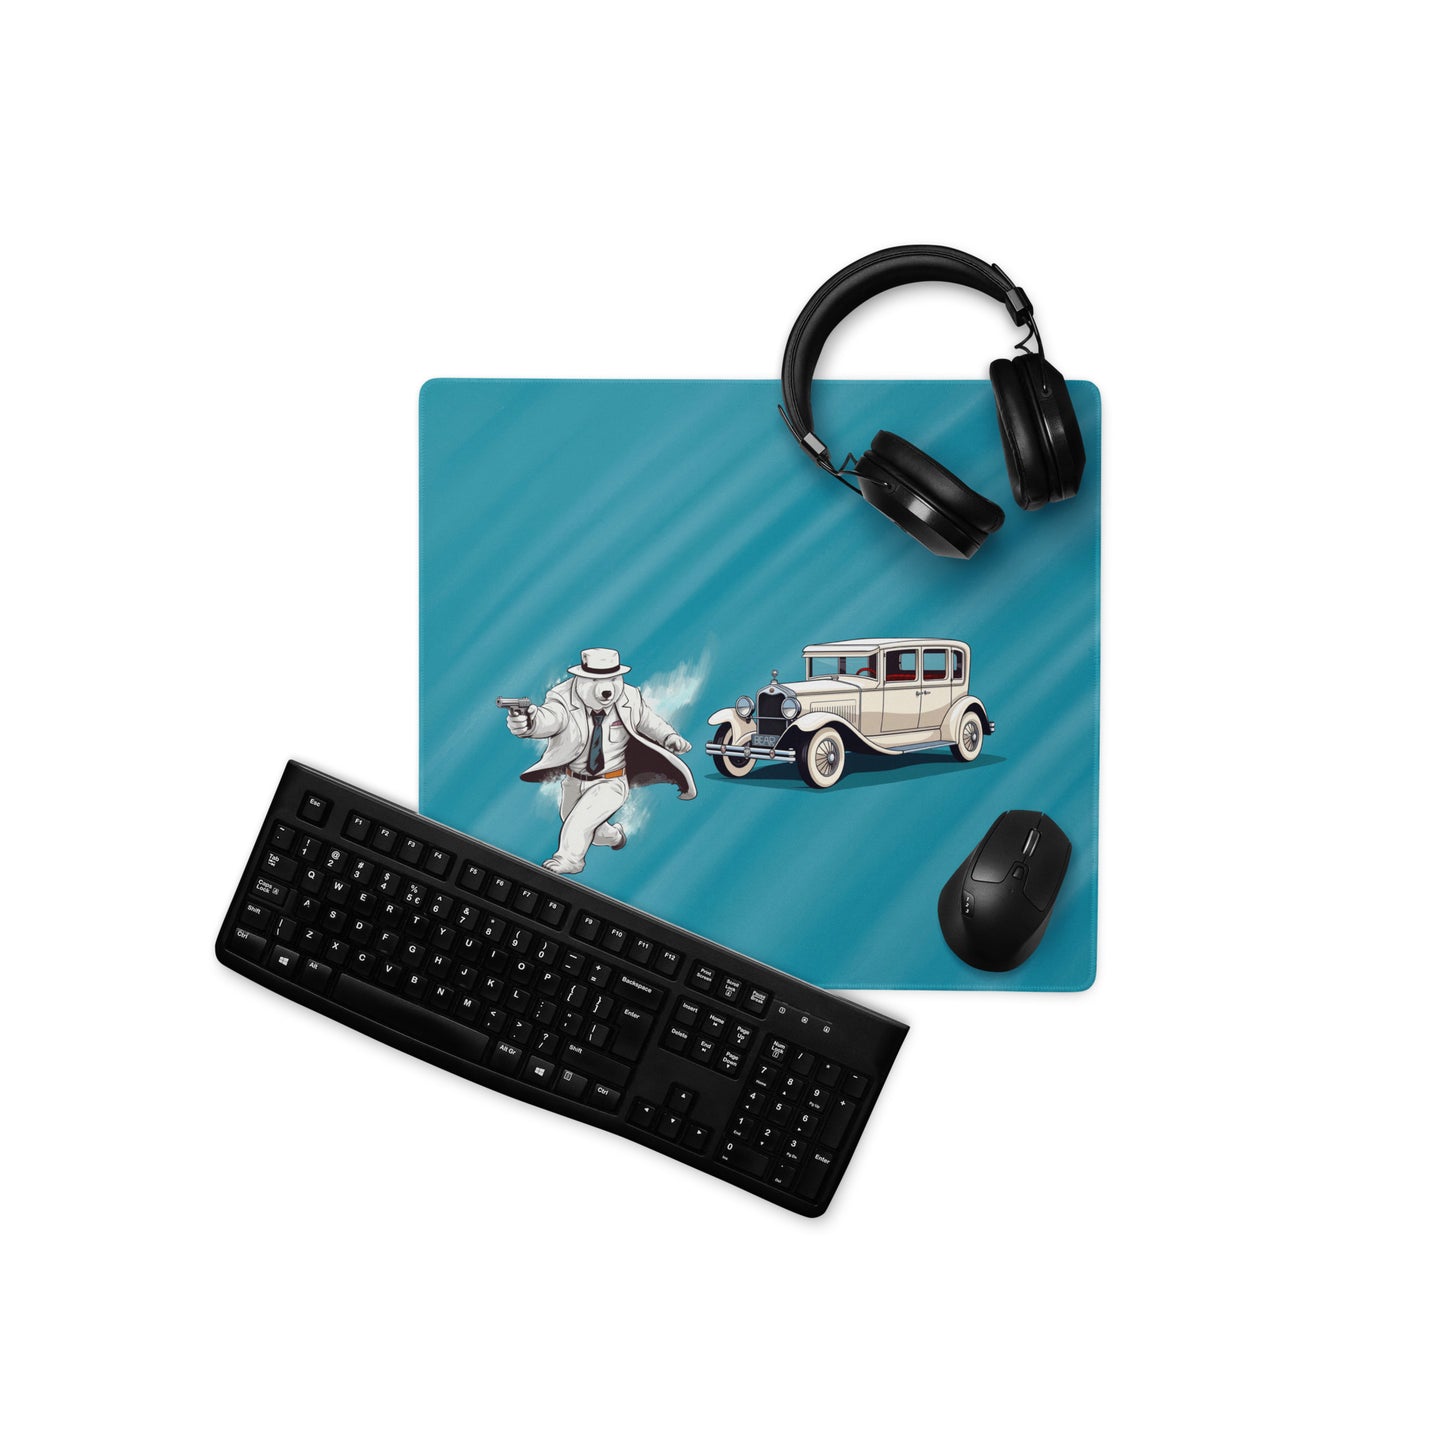 18" x 16" desk pad with a gangster polar bear and his car displayed with headphones, a keyboard and a mouse on it. Blue in color.